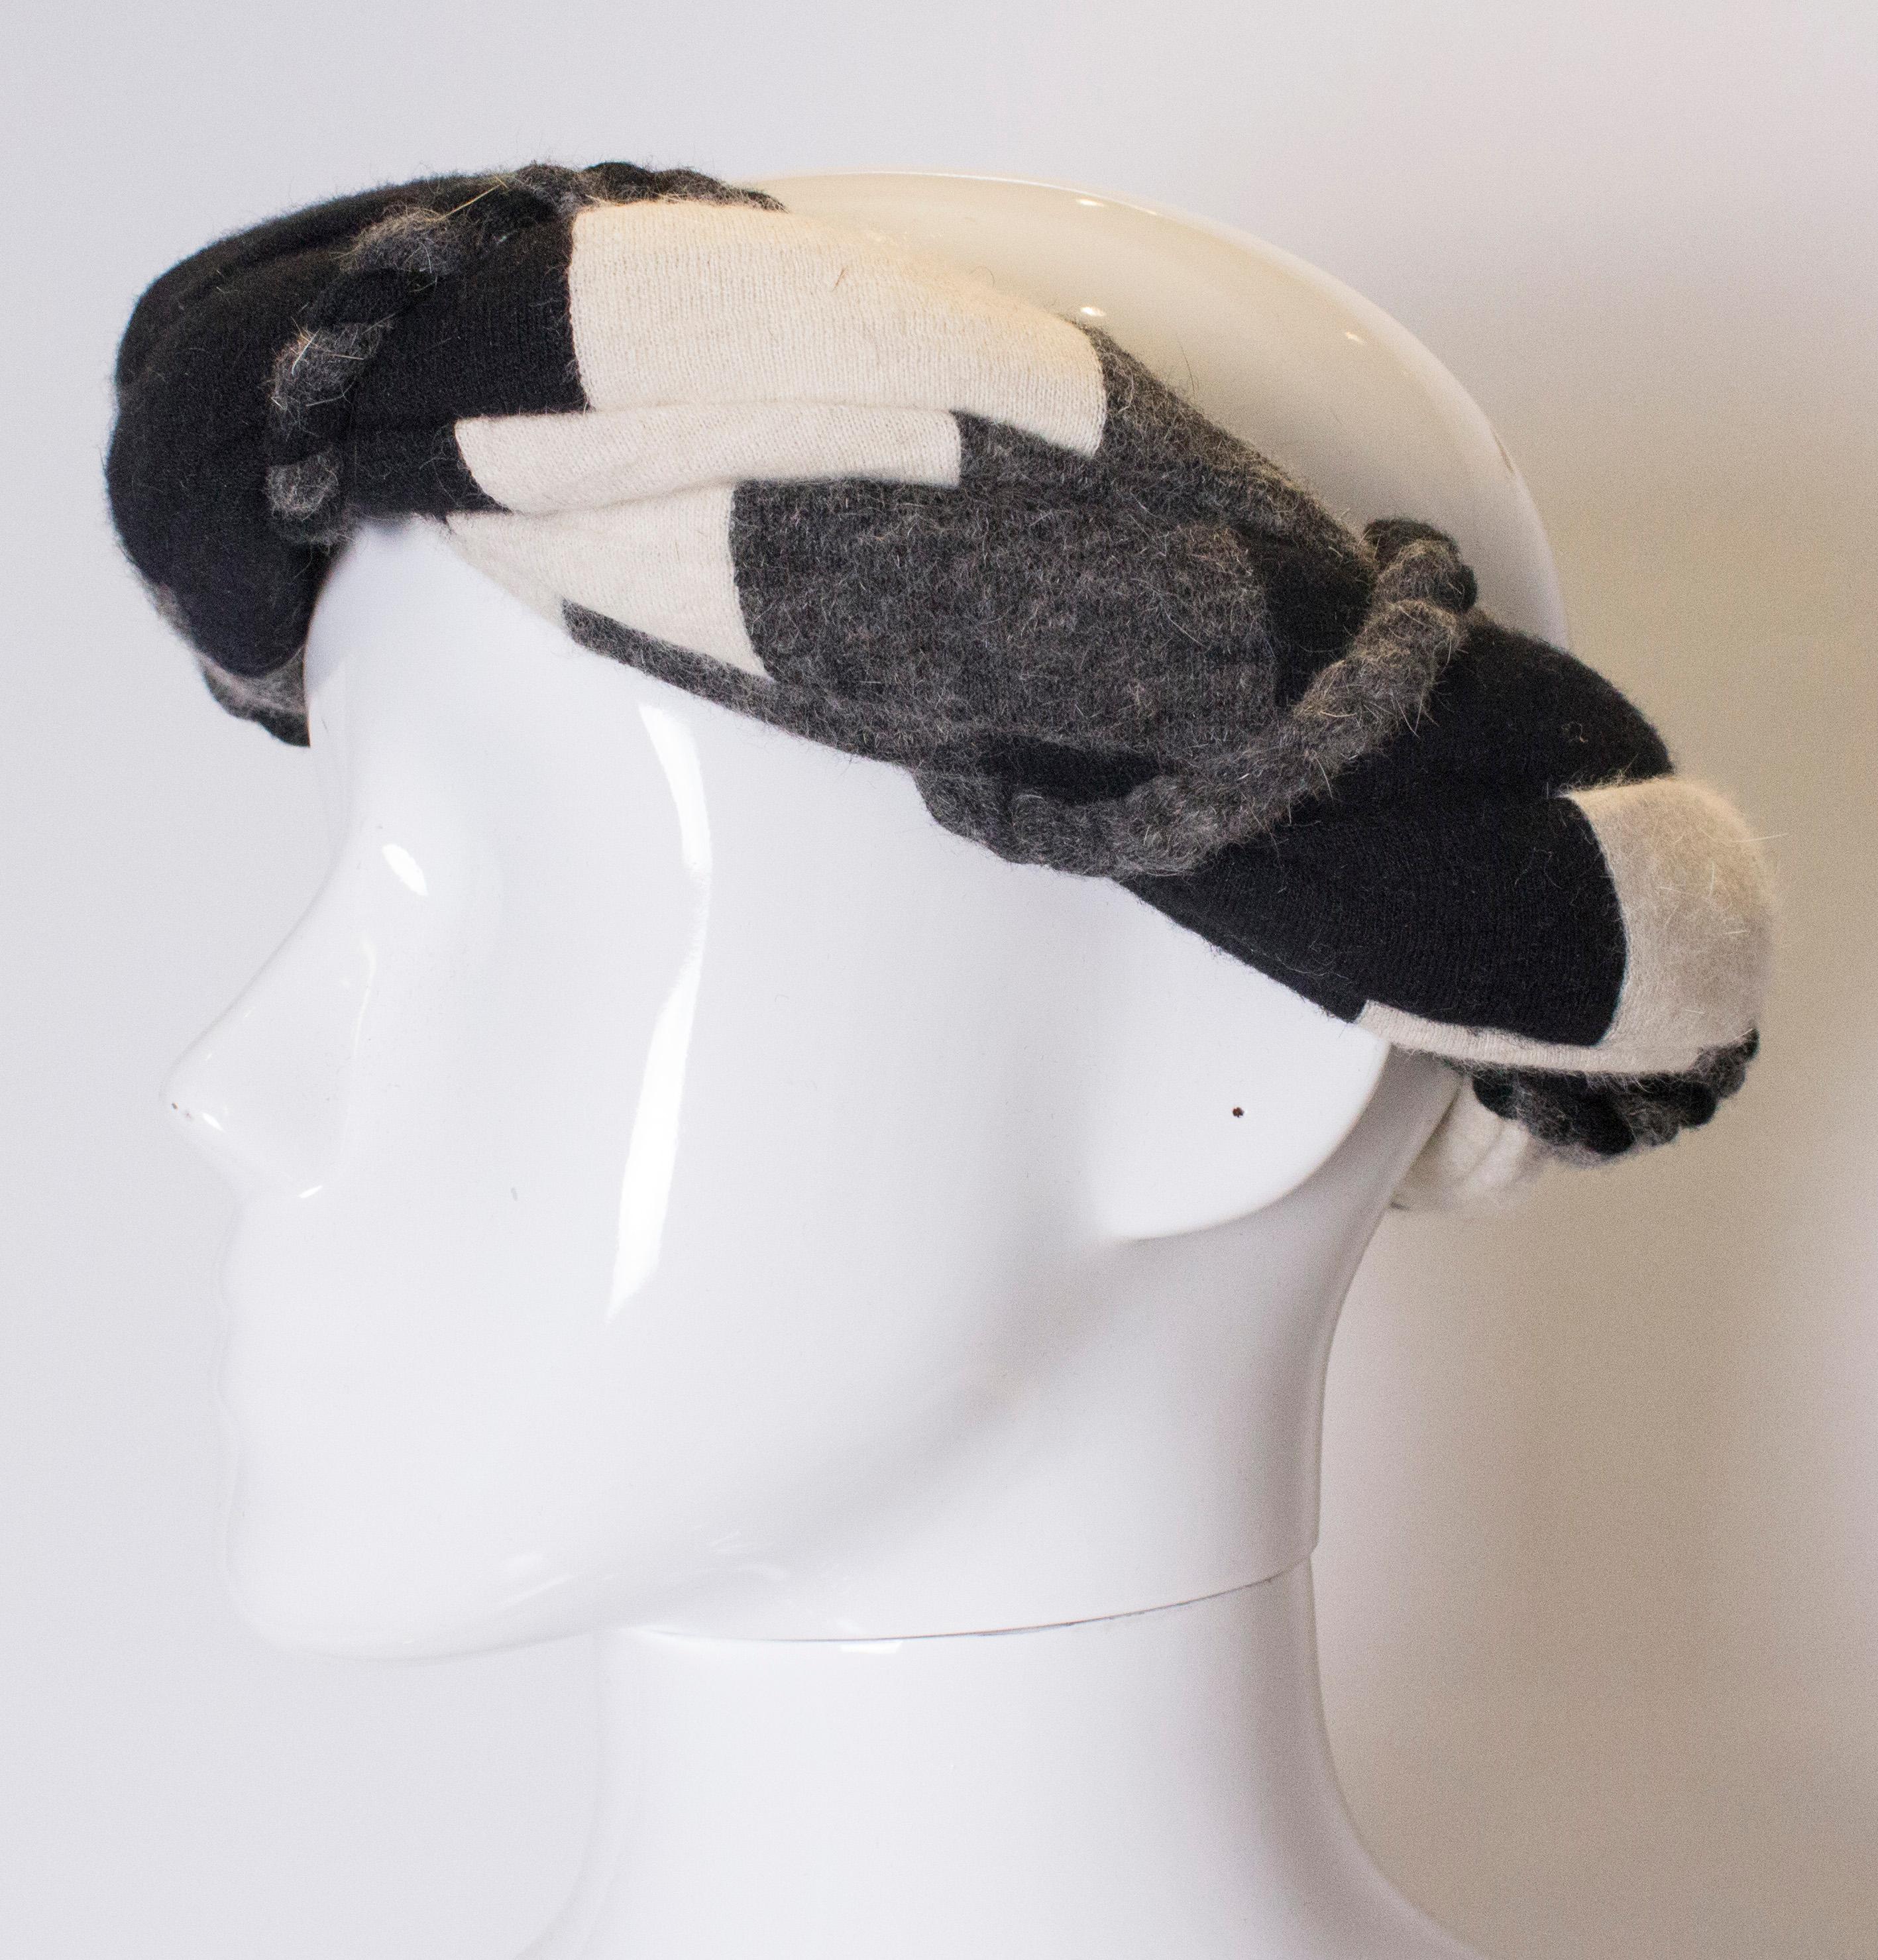 A chic vintage headband by Jean Muir. In shade of grey, black and white with a thin black and grey plait running across.